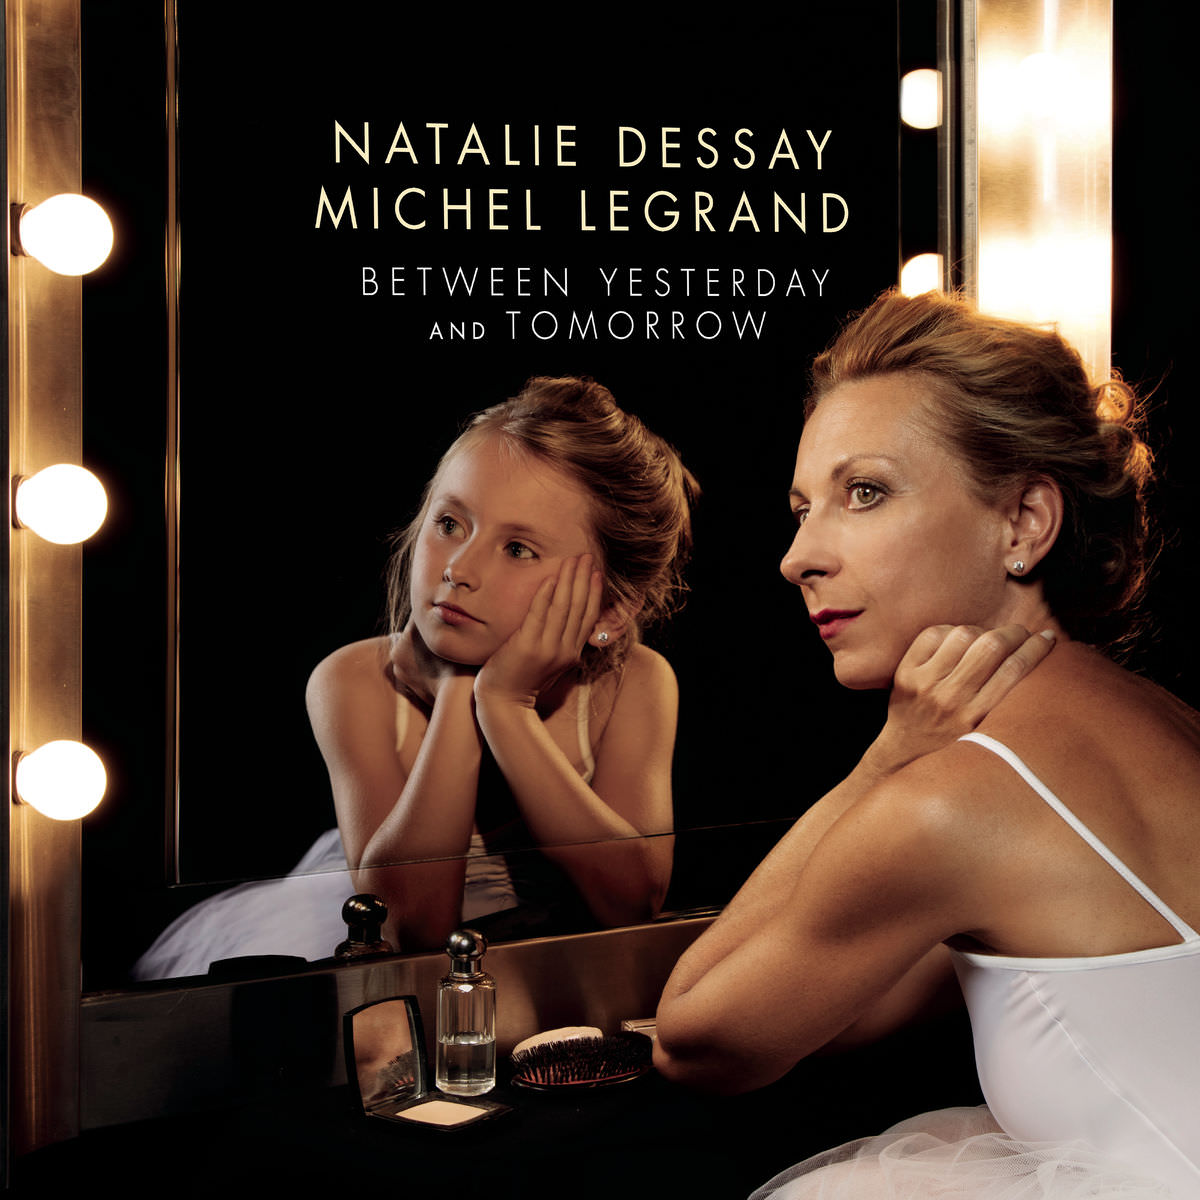 Natalie Dessay & Michel Legrand - Between Yesterday and Tomorrow (The Extraordinary Story of an Ordinary Woman) (2017) [Qobuz FLAC 24bit/44,1kHz]